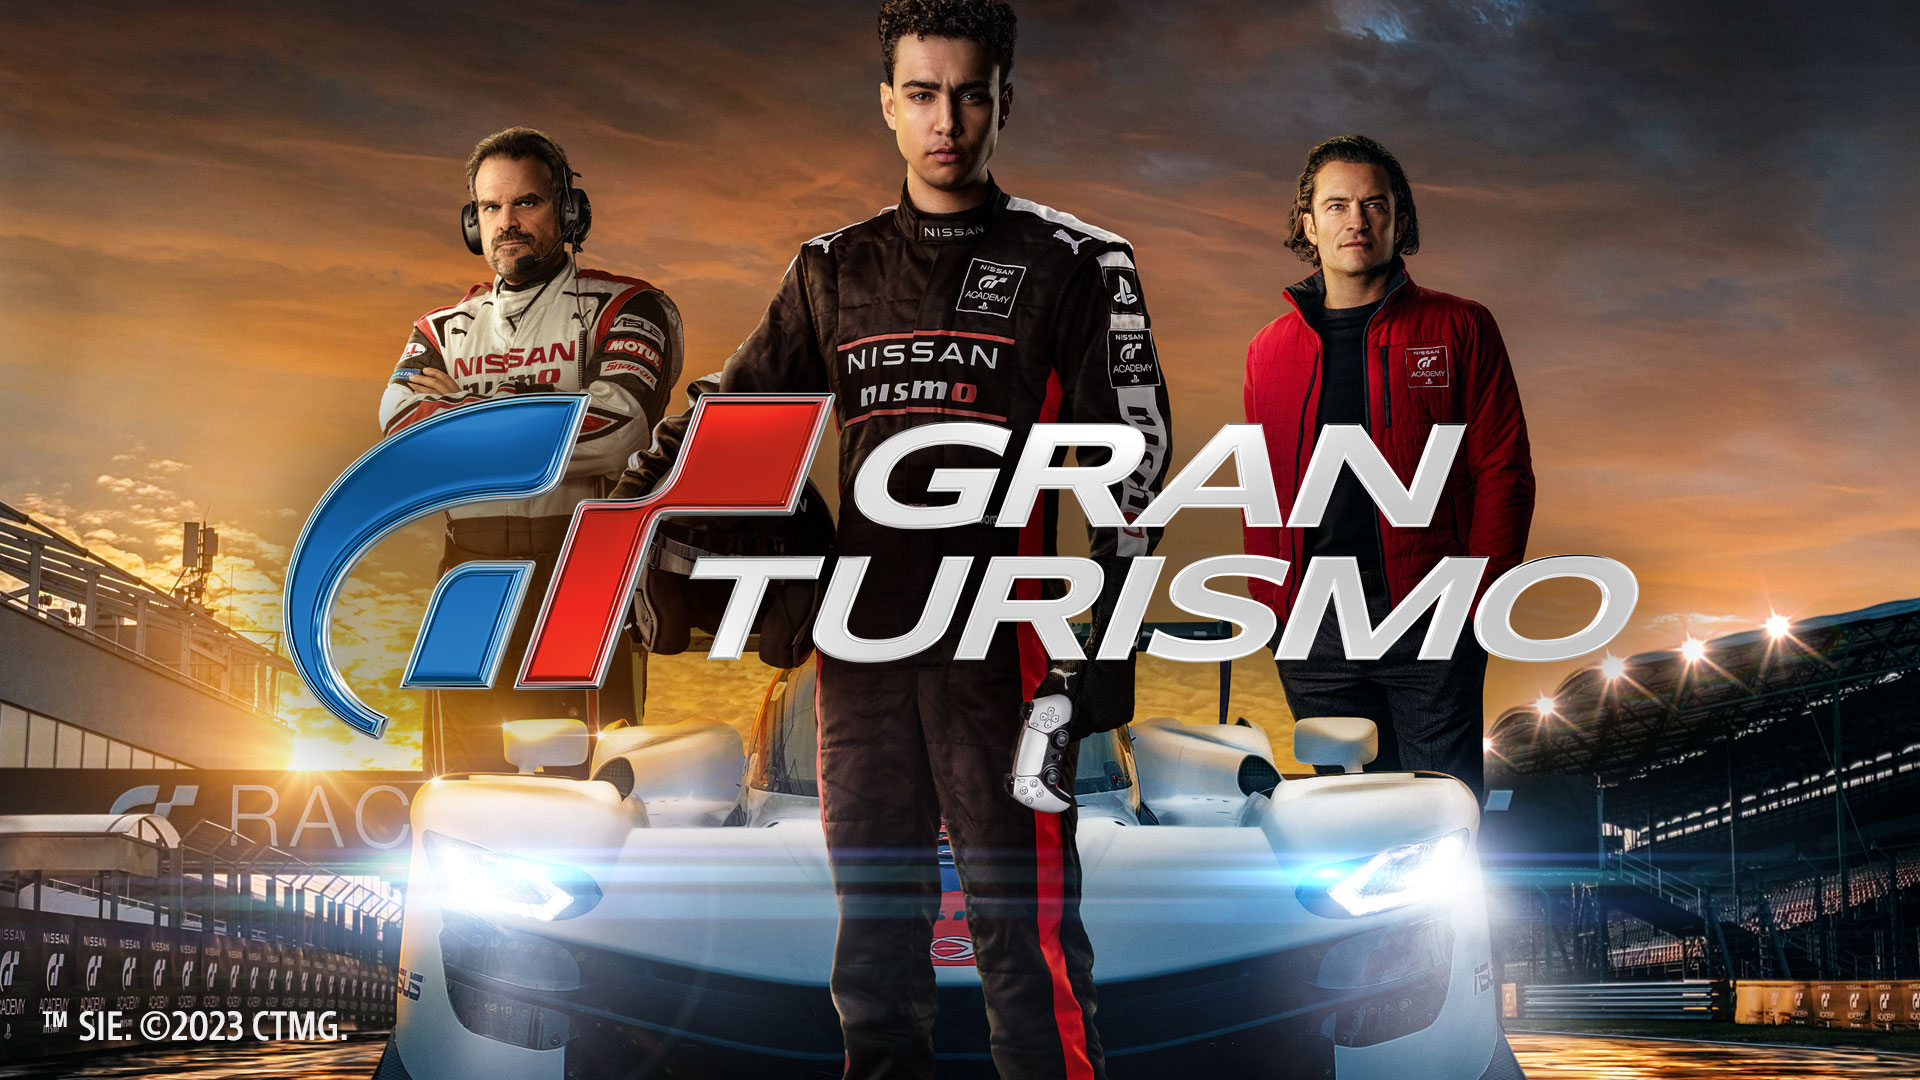 Grand Turismo Official Poster from the 2023 movie